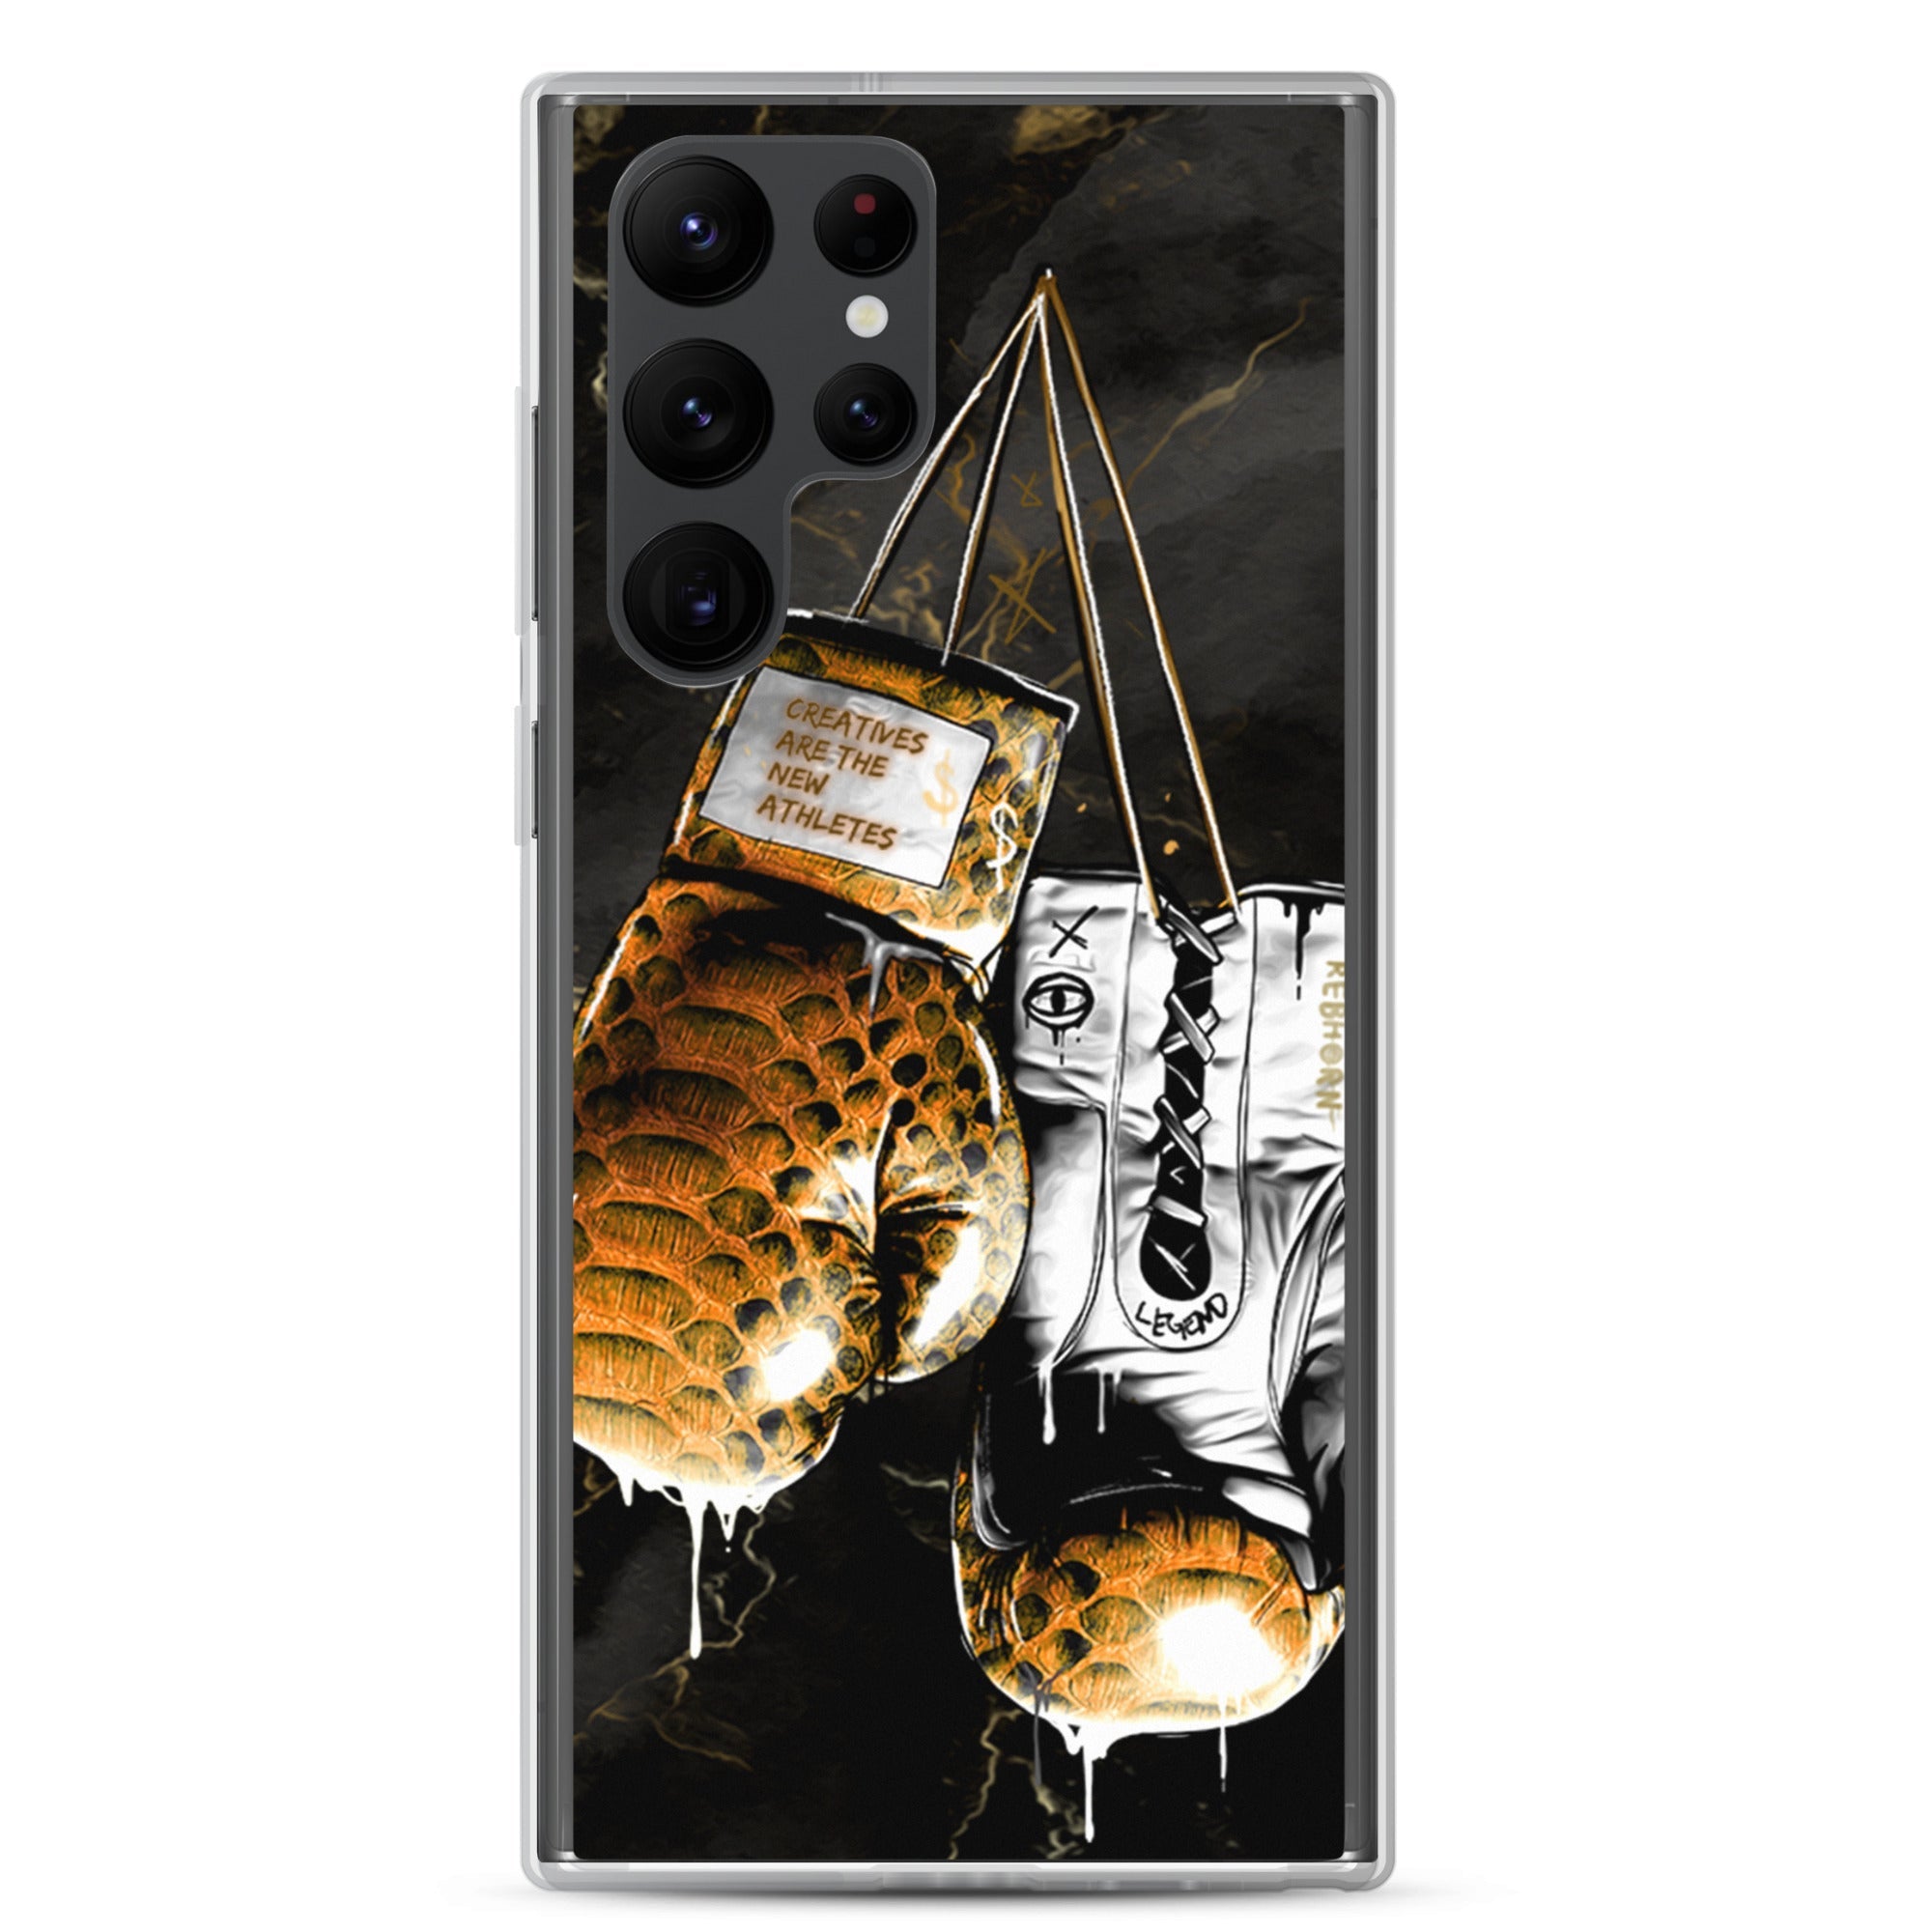 Creatives Are The New Athletes (Boxing Gloves) Samsung Case - REBHORN DESIGN